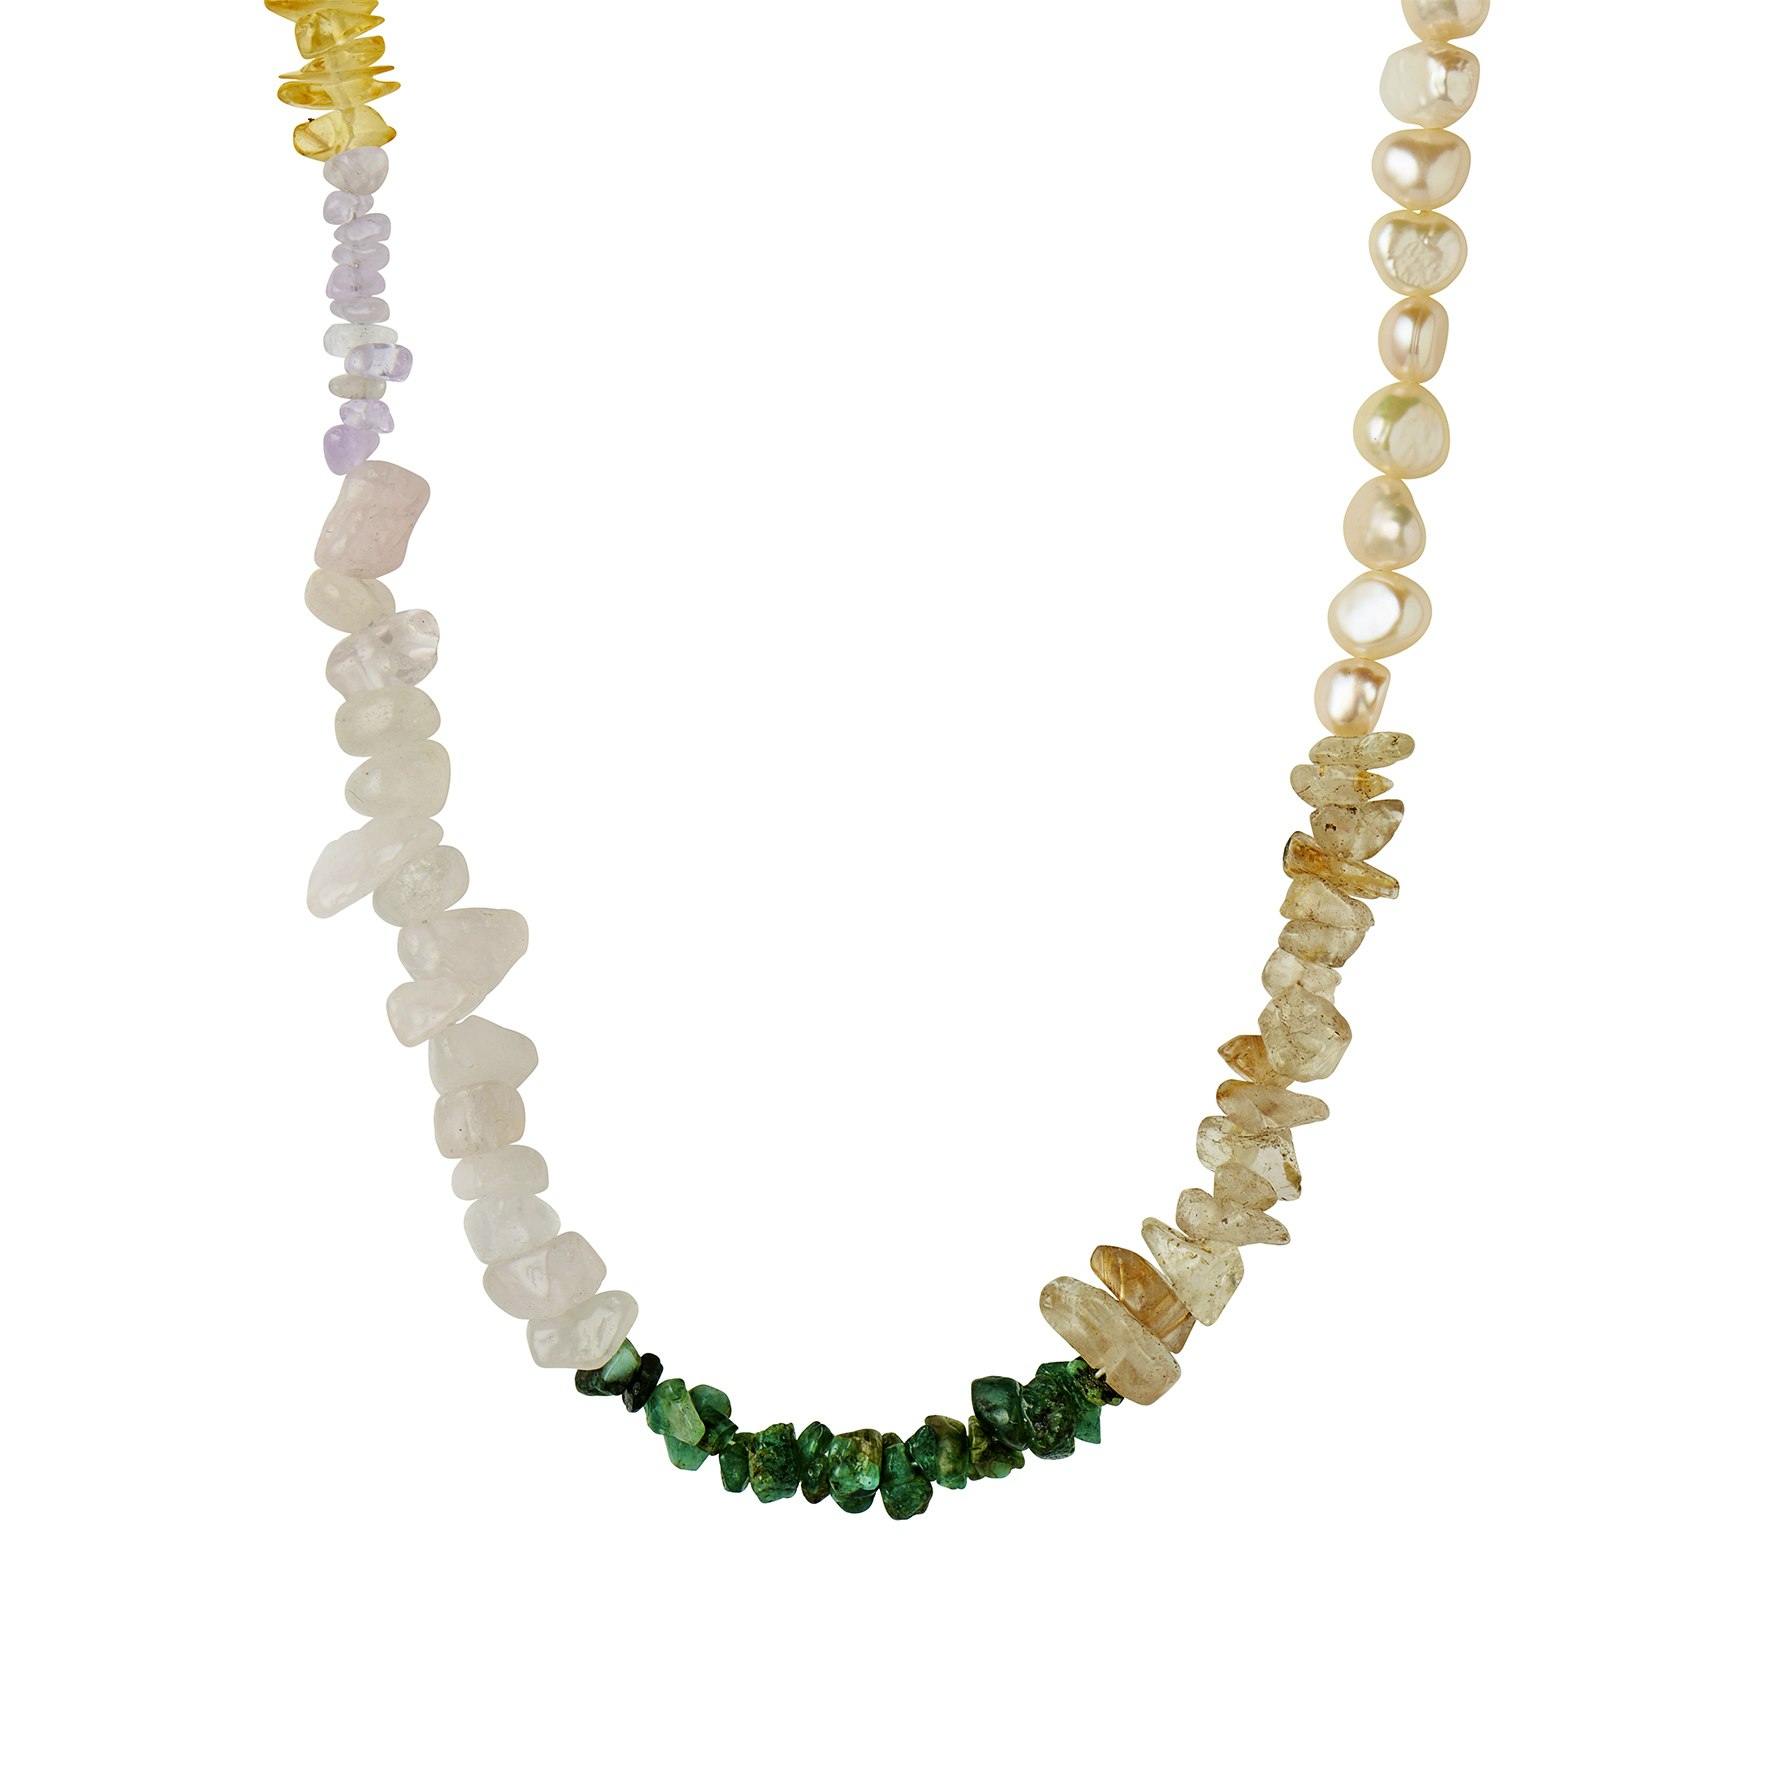 Crispy Coast Necklace - Pacific Colors With Pearls & Gemstones van STINE A Jewelry in Verguld-Zilver Sterling 925